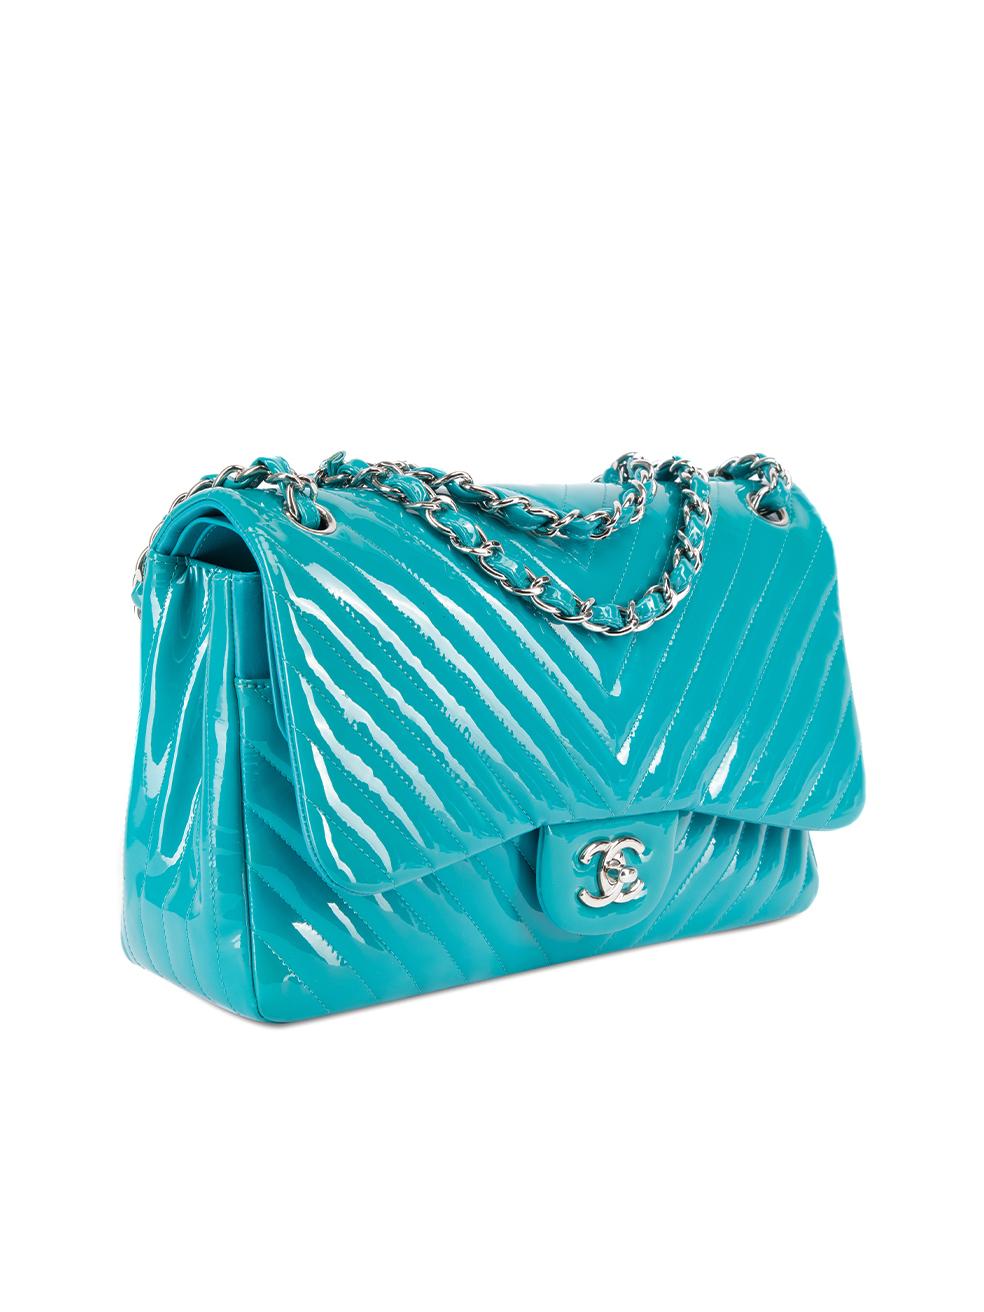 CONDITION is Very good. Minimal wear to bag is evident. Minimal wear to the leather under the inner bag flap which has maekeup stains on this used Chanel designer resale item.   Details  2014-2015 Turquoise Patent leather Large shoulder bag Chevron